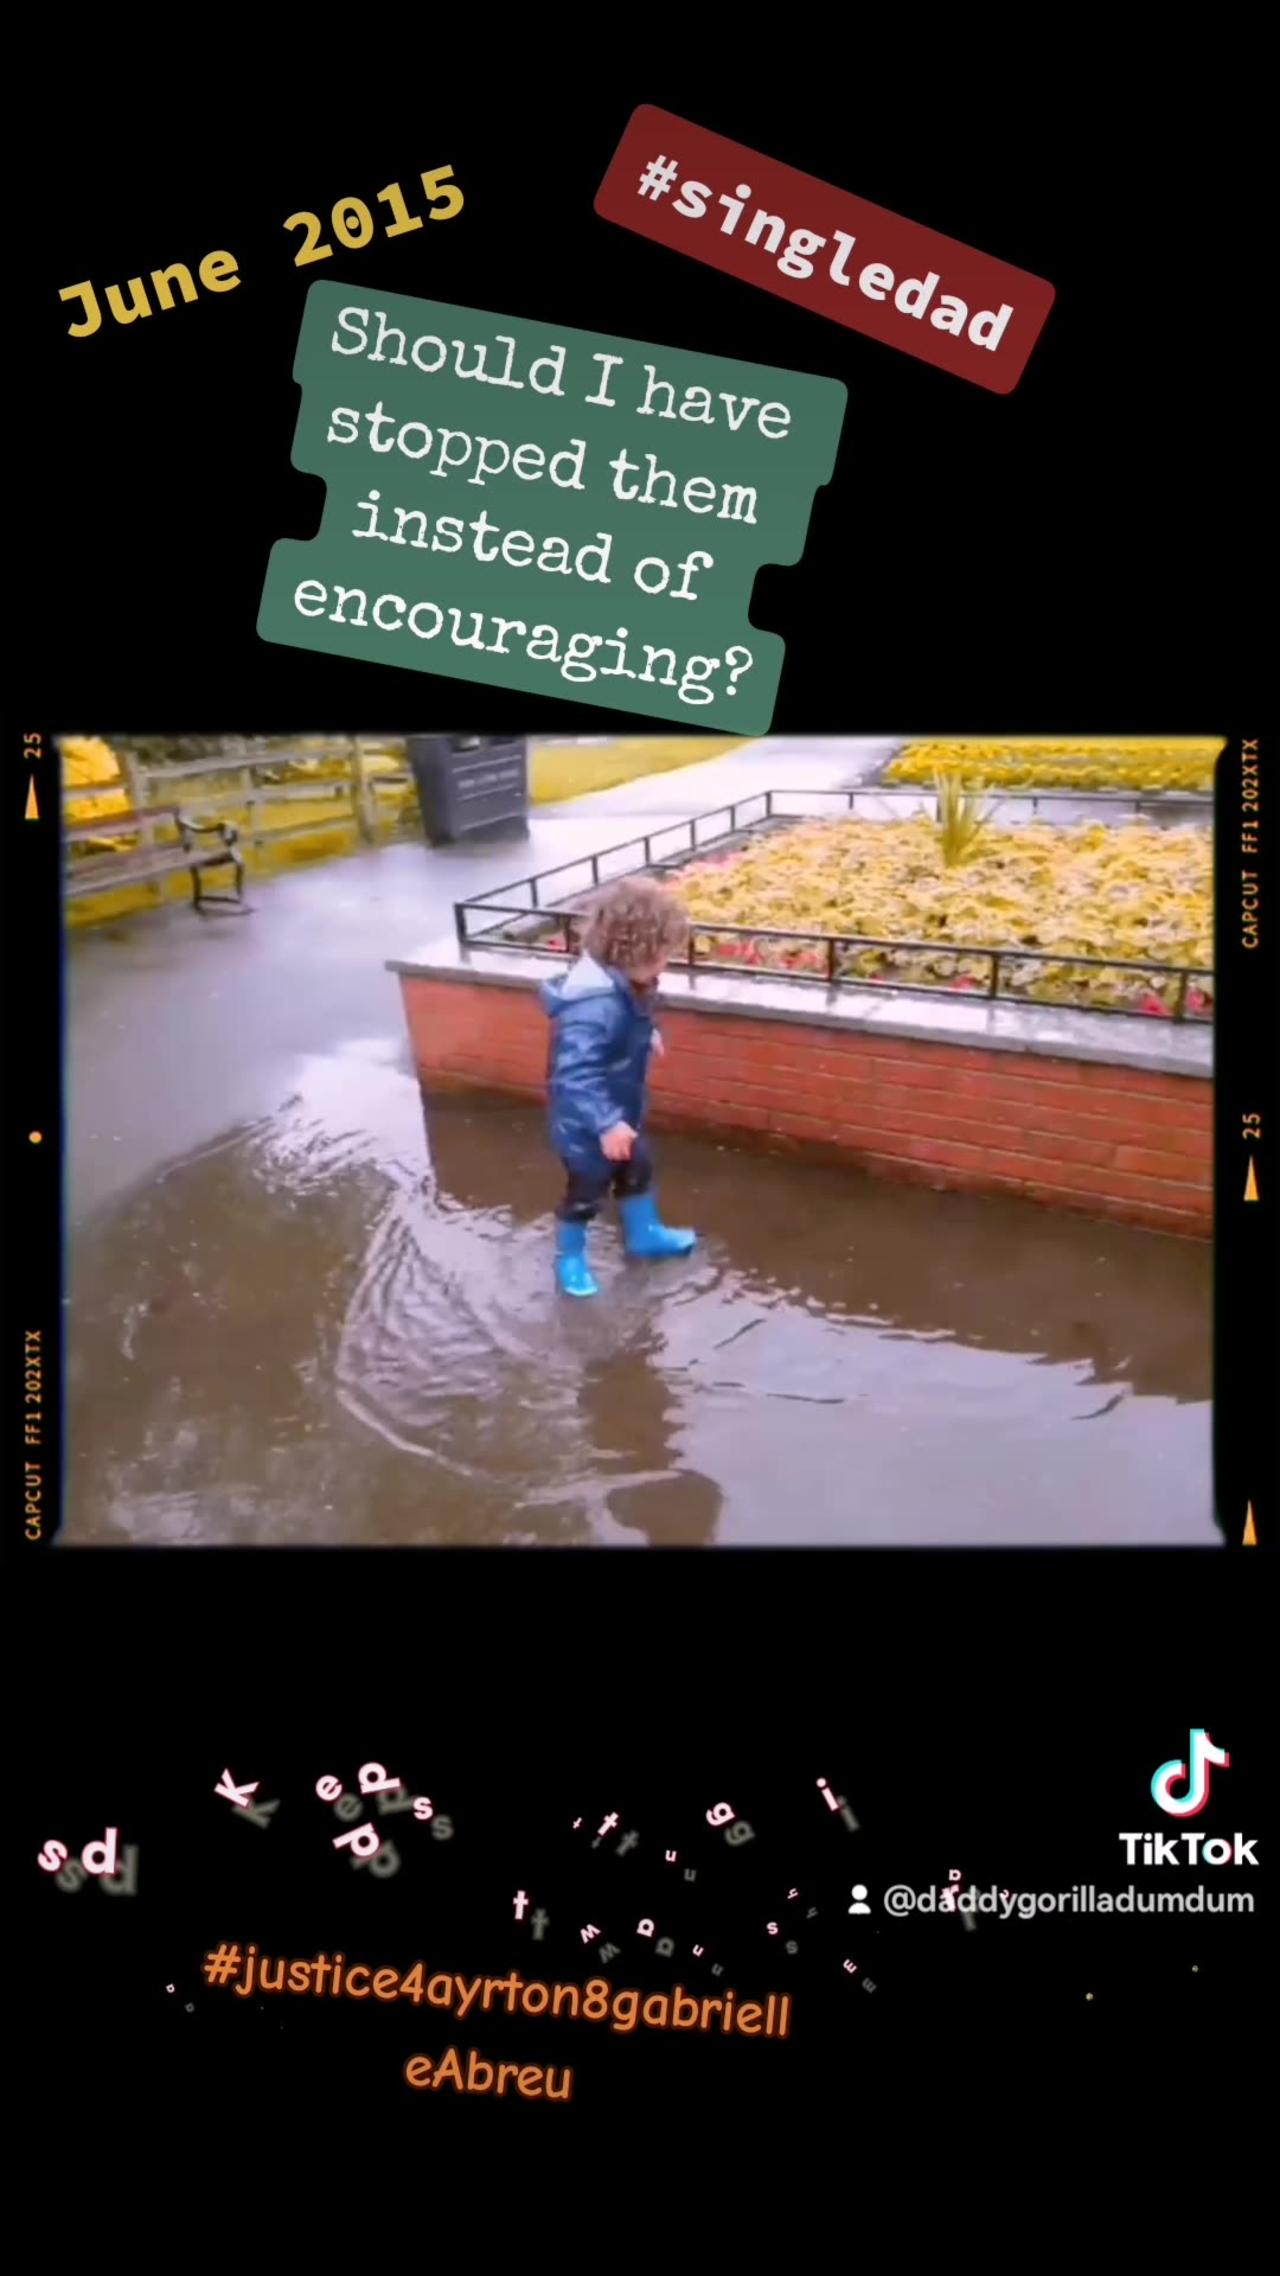 June 2015, Encouraging Ayrton & Gabrielle to jump from wall into big puddle